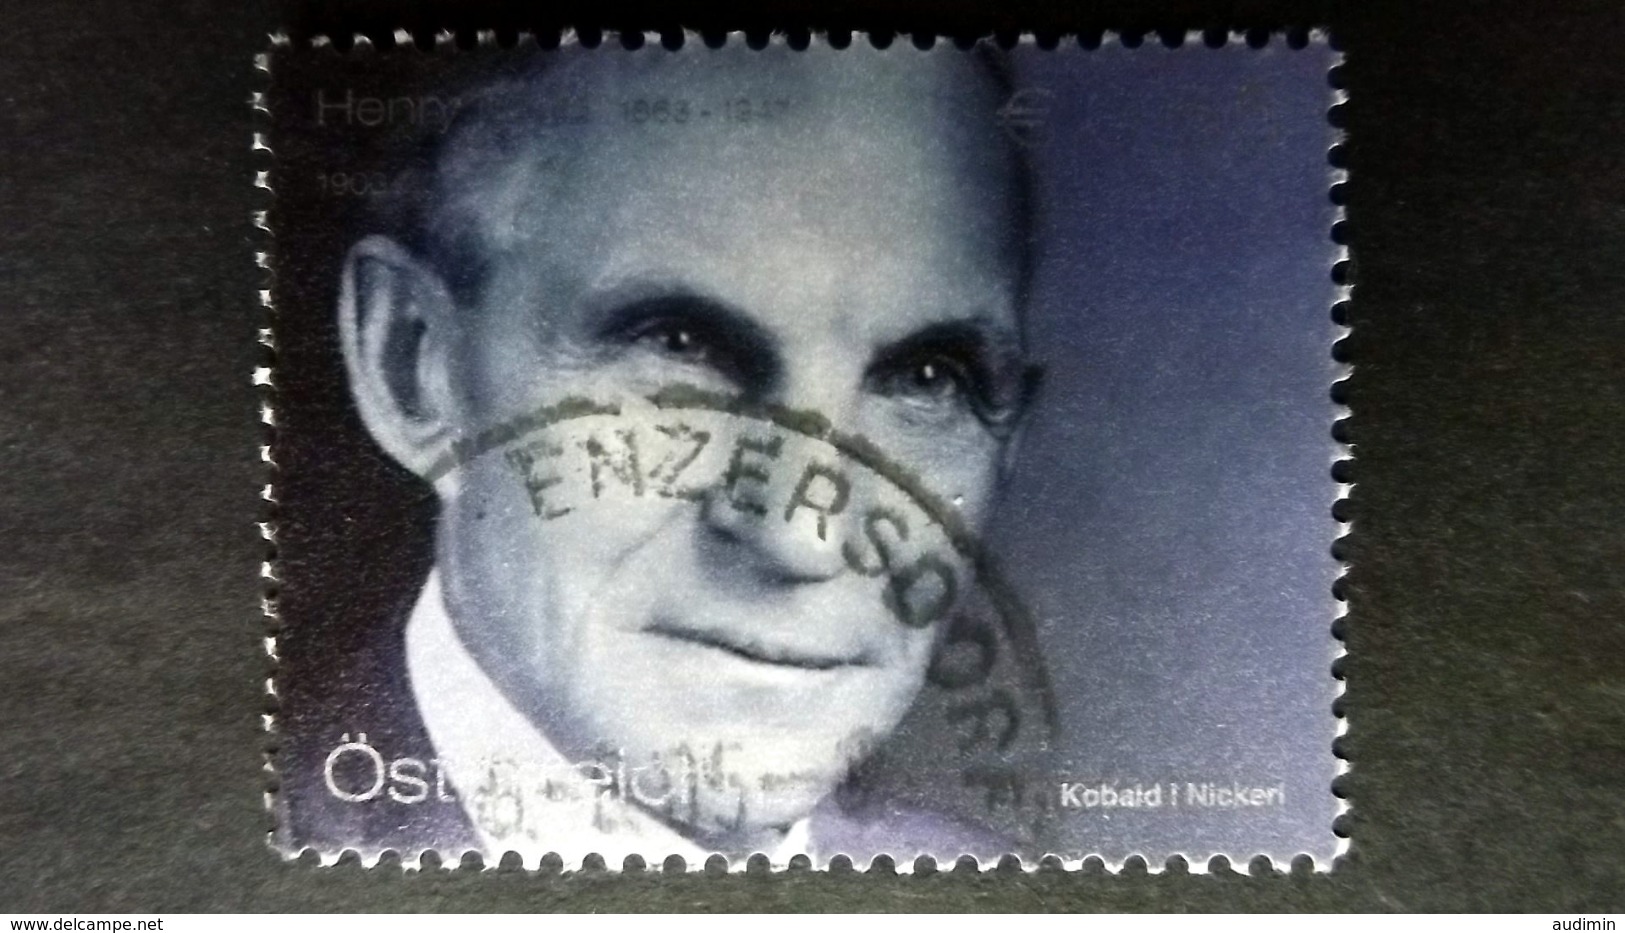 Österreich 2428 Oo/used, Henry Ford (1863-1947), Amerikanischer Industrieller - Used Stamps